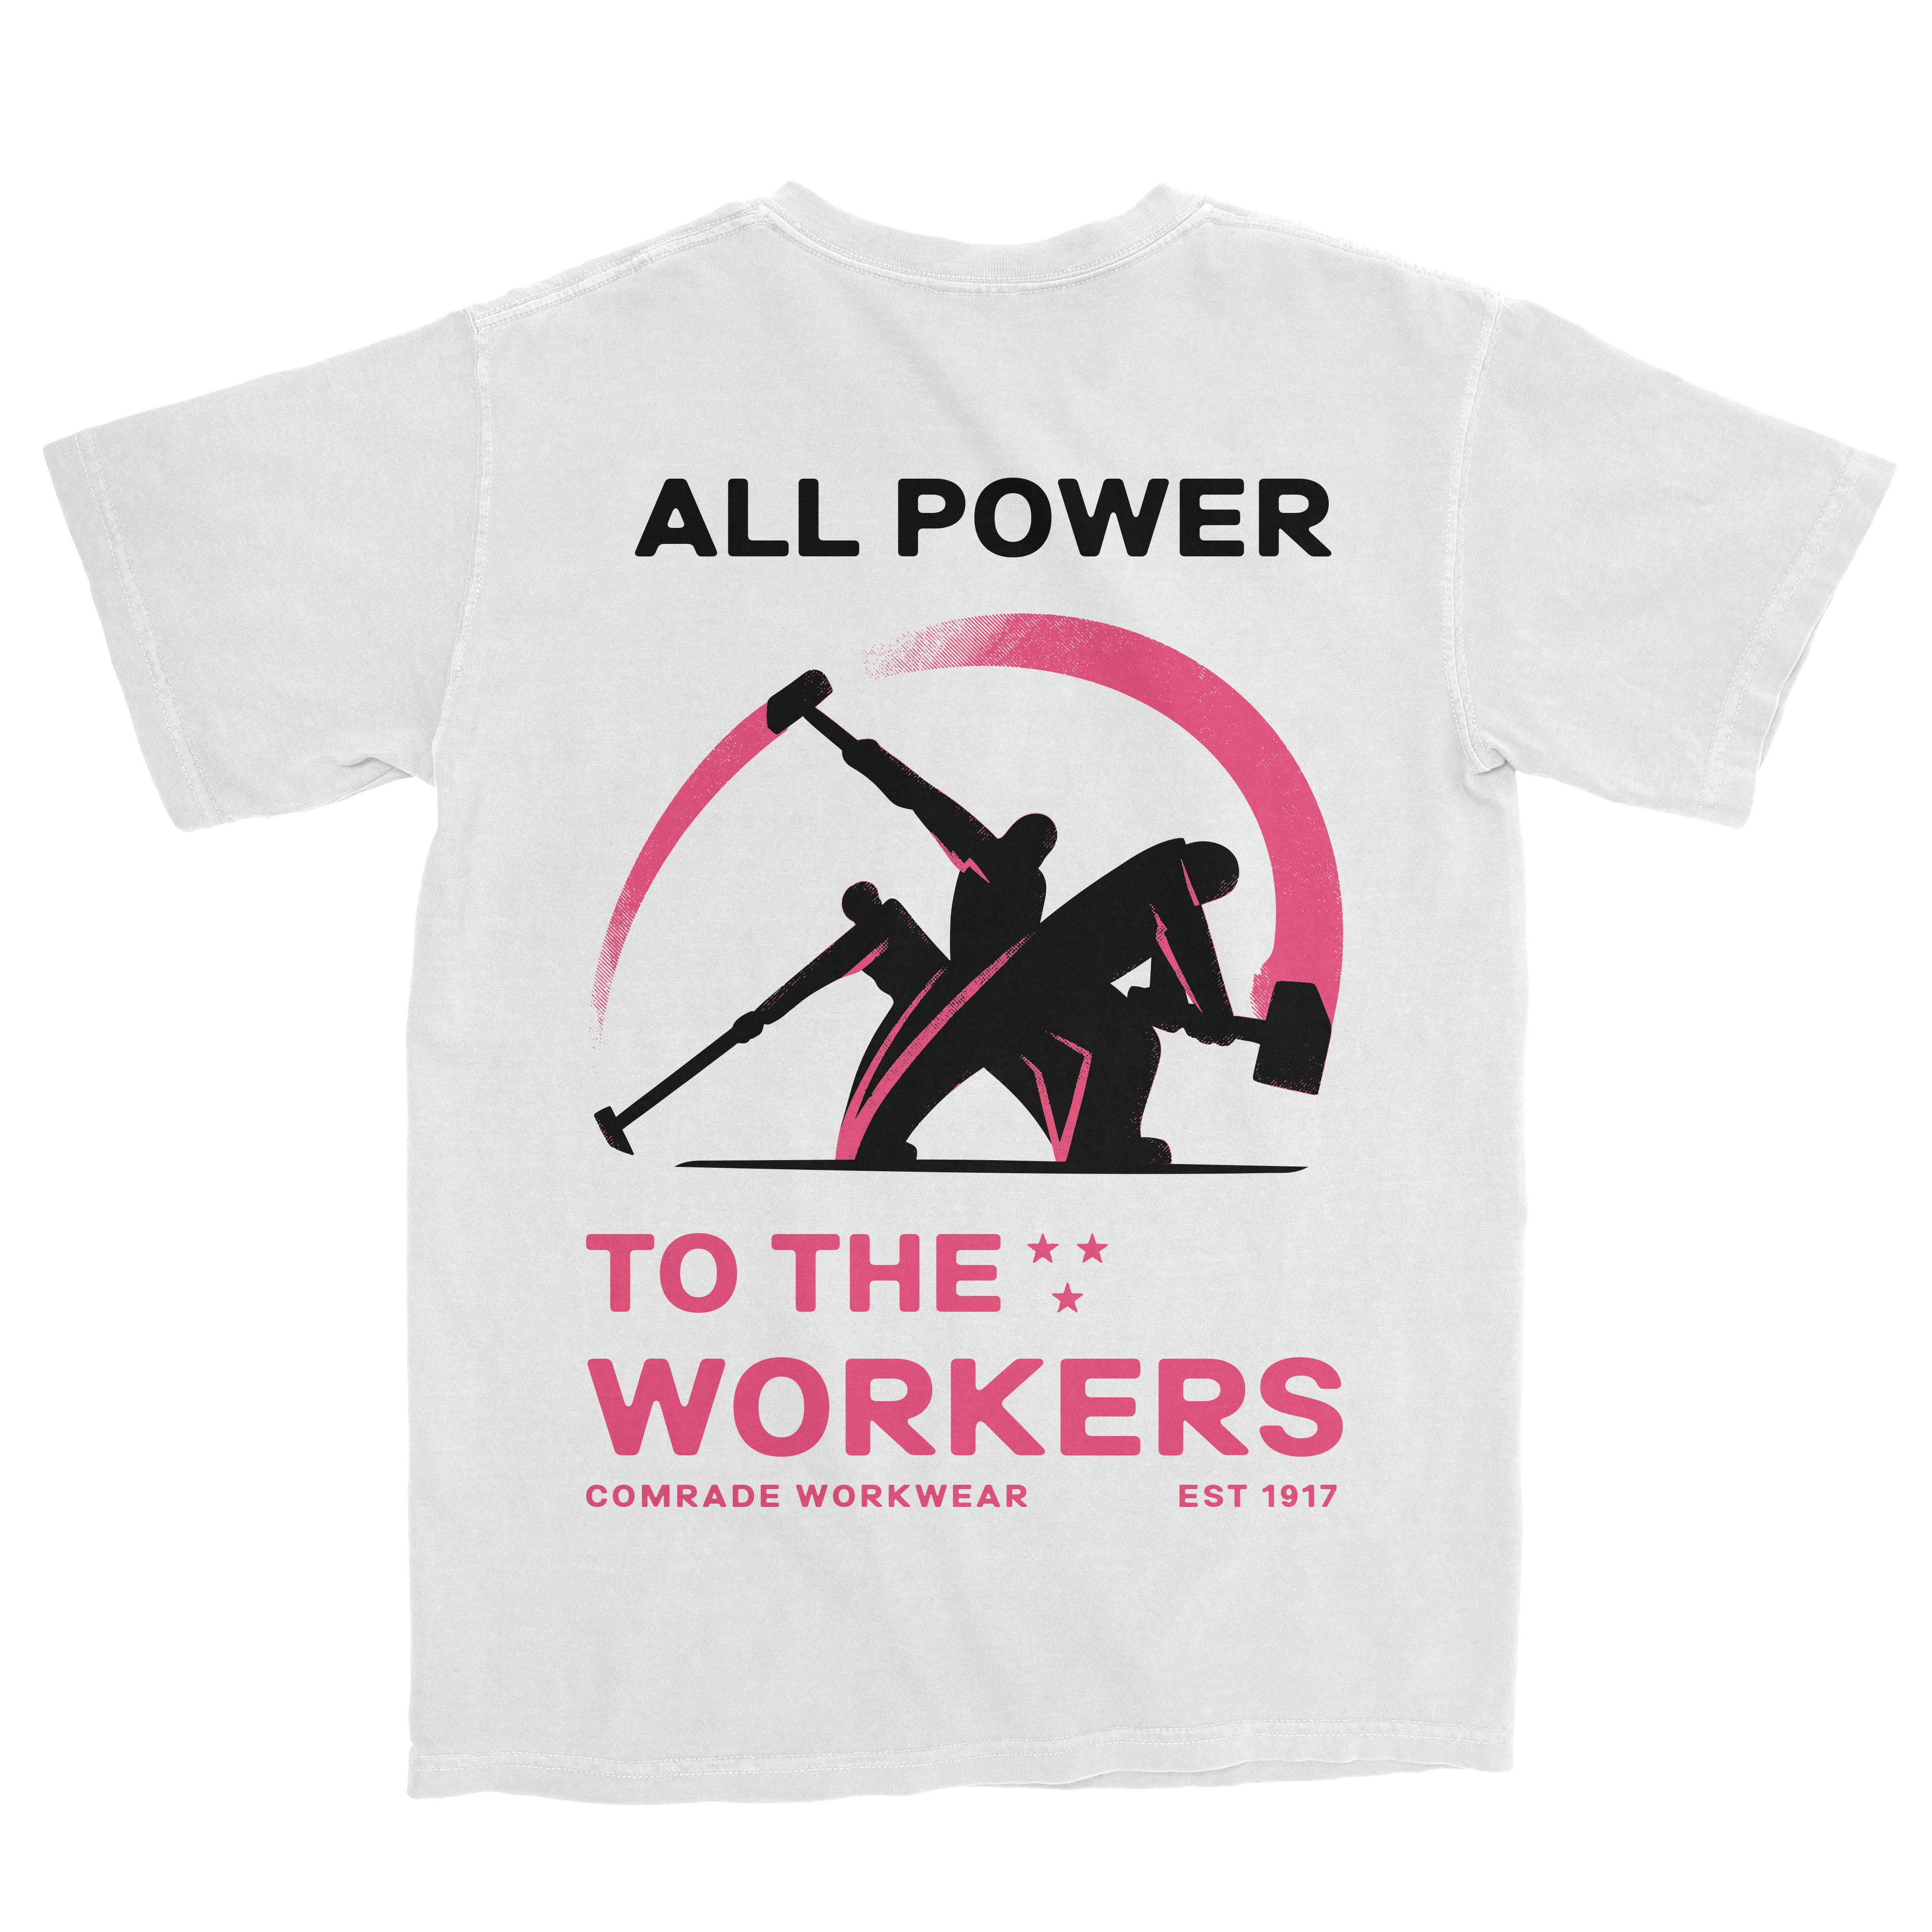 All Power to Labor